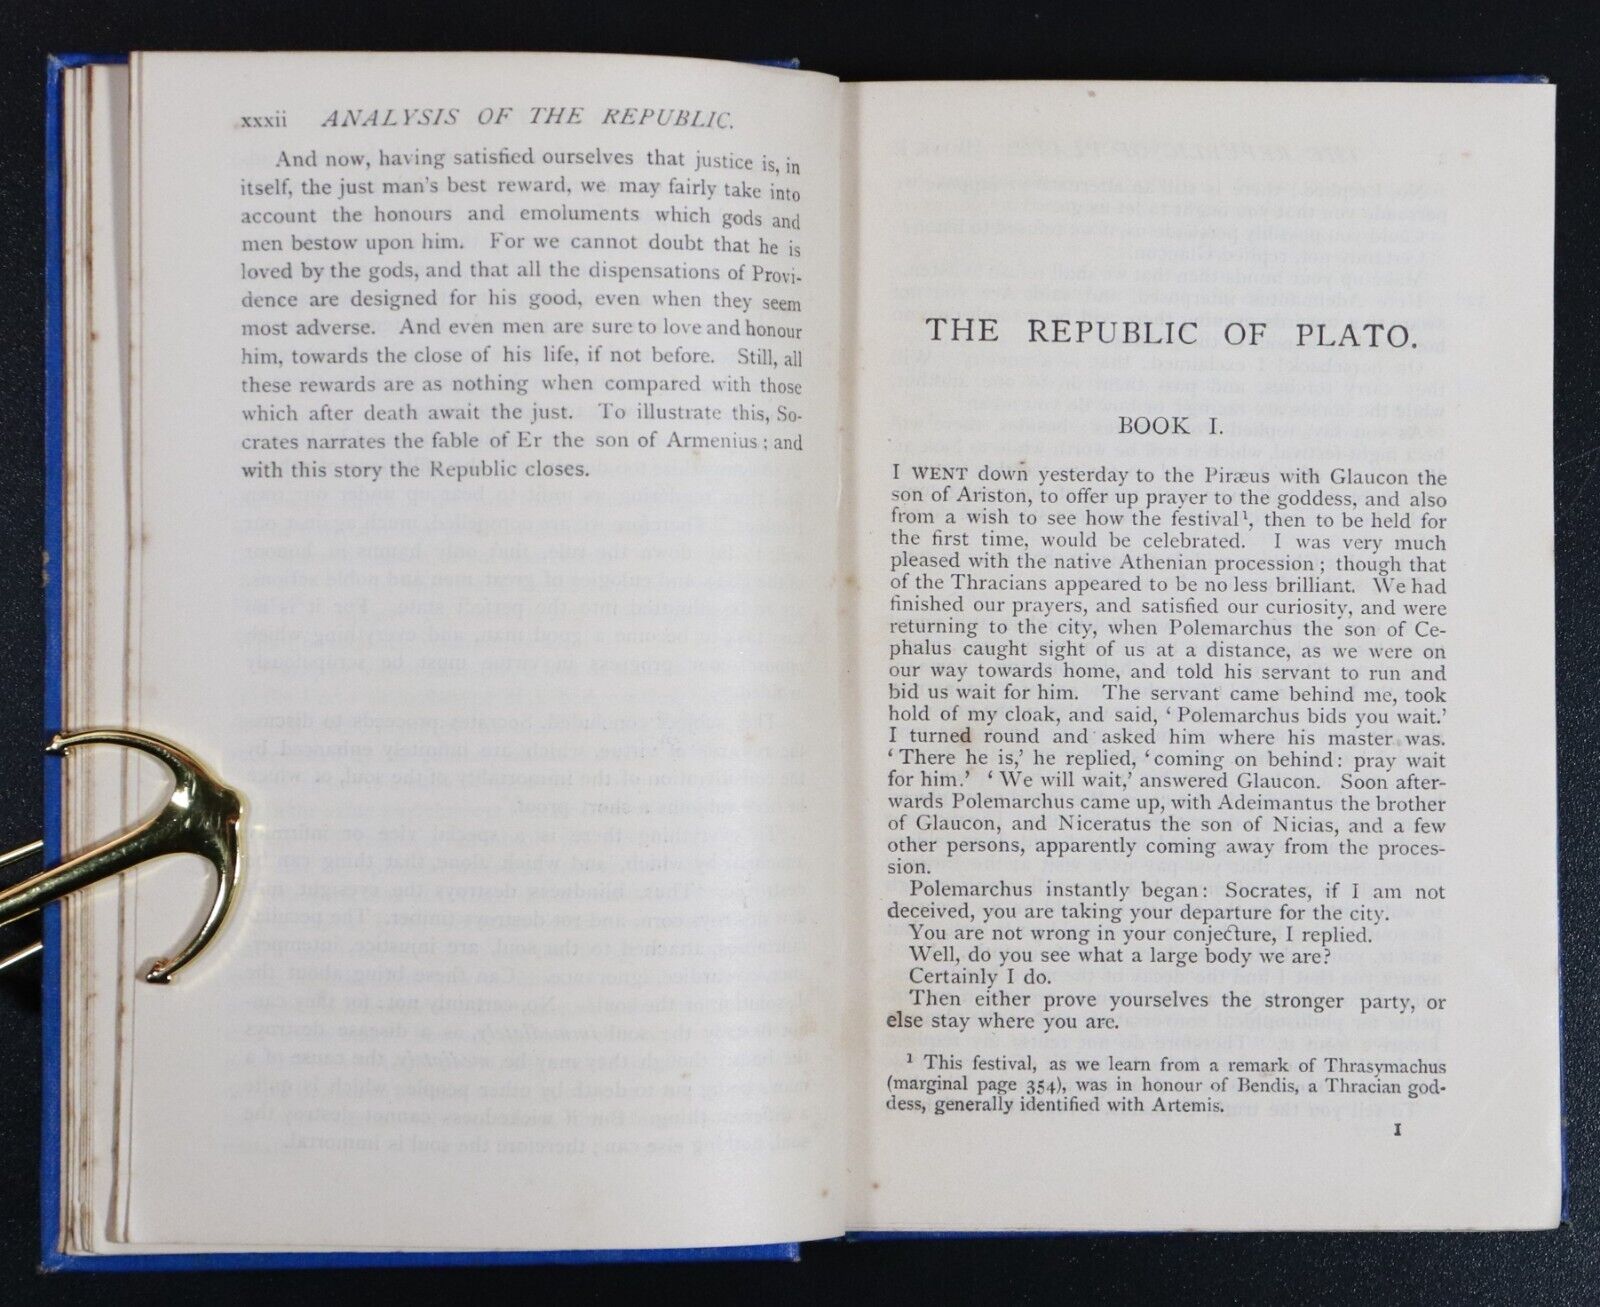 1921 The Republic Of Plato by Davies & Vaughan Antique Greek Philosophy Book